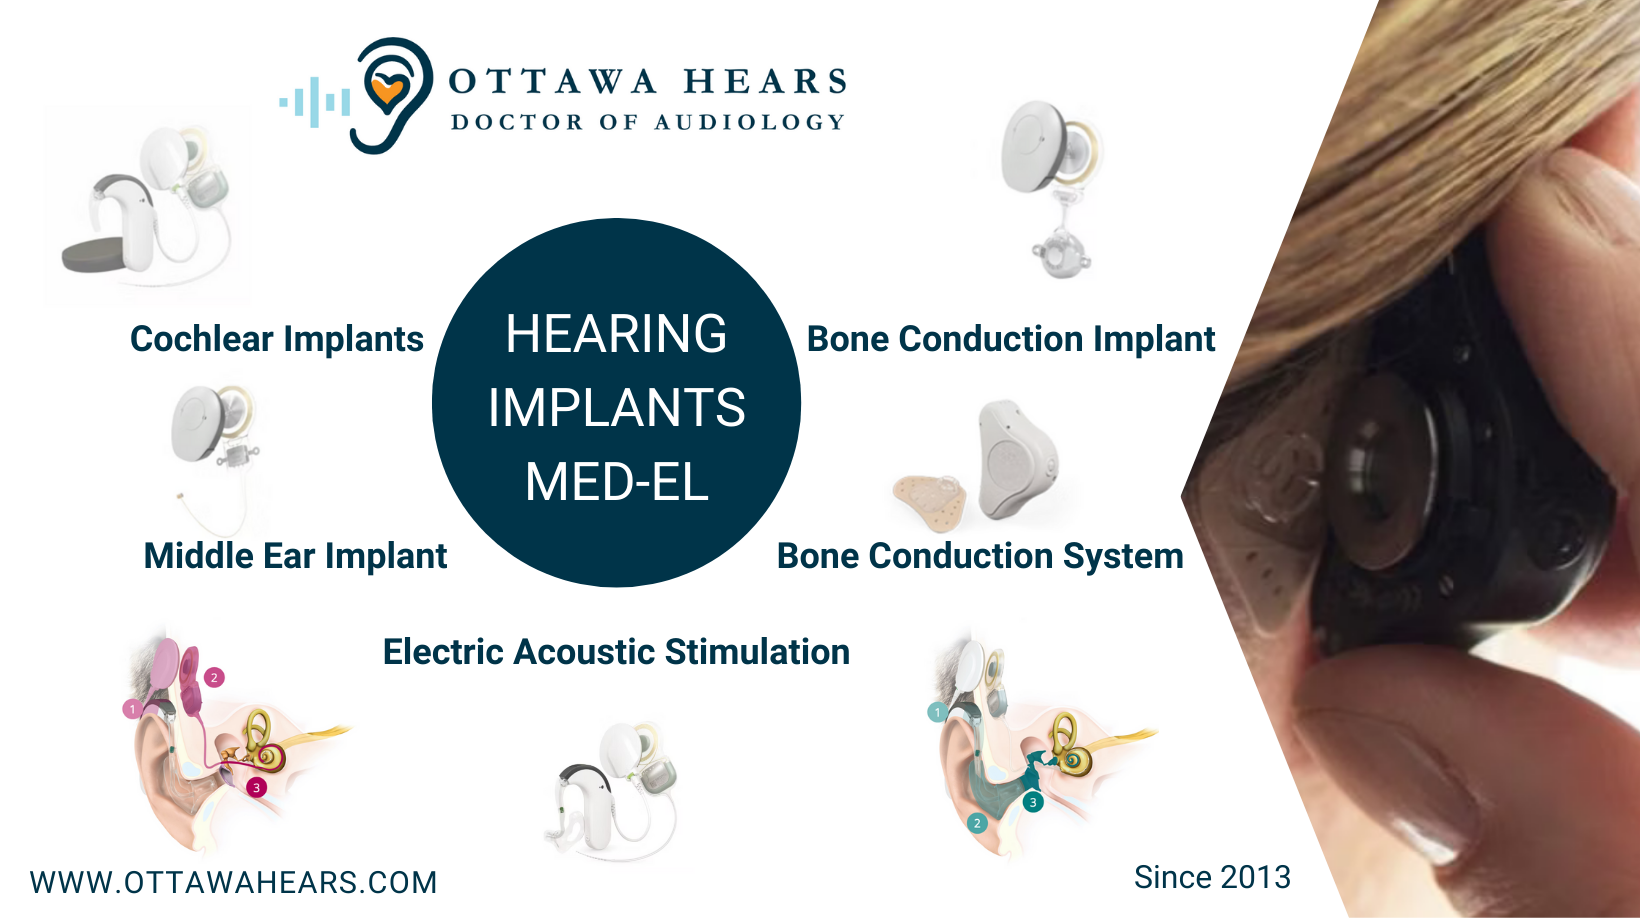 Beyond Hearing Aids: A Solution for All, Hearing Implants